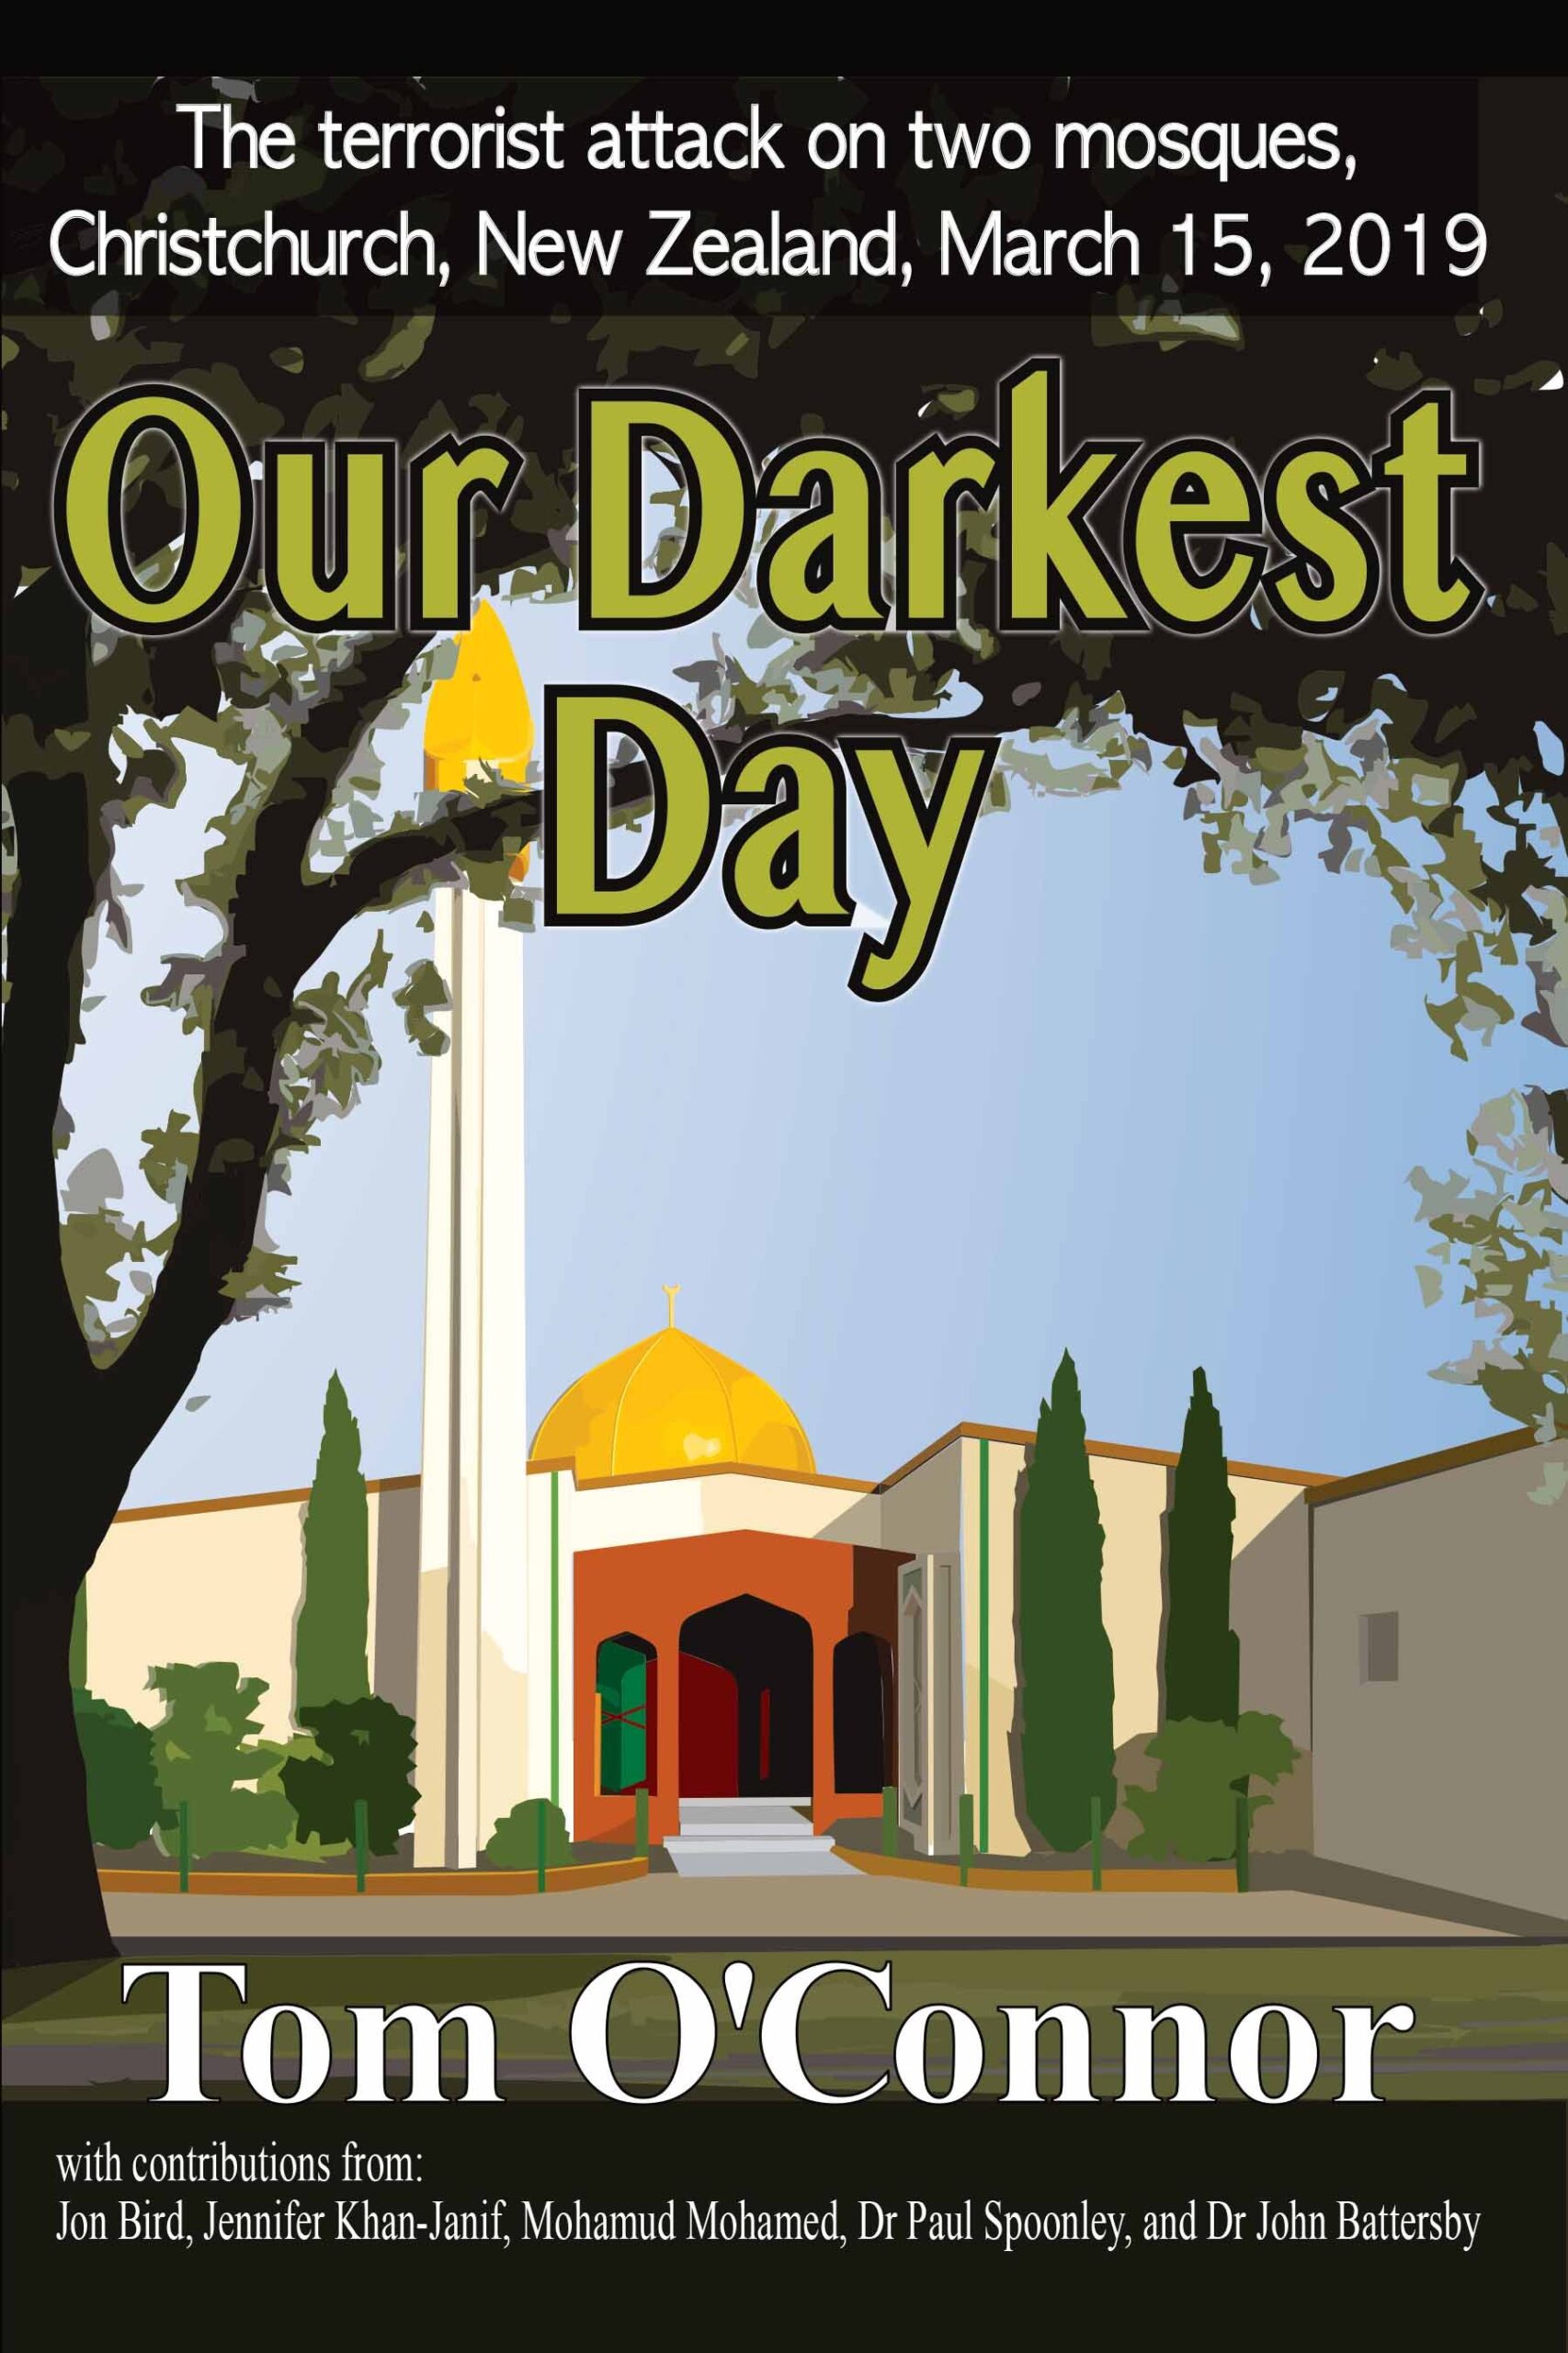 Our Darkest Day by Tom OConnor book cover